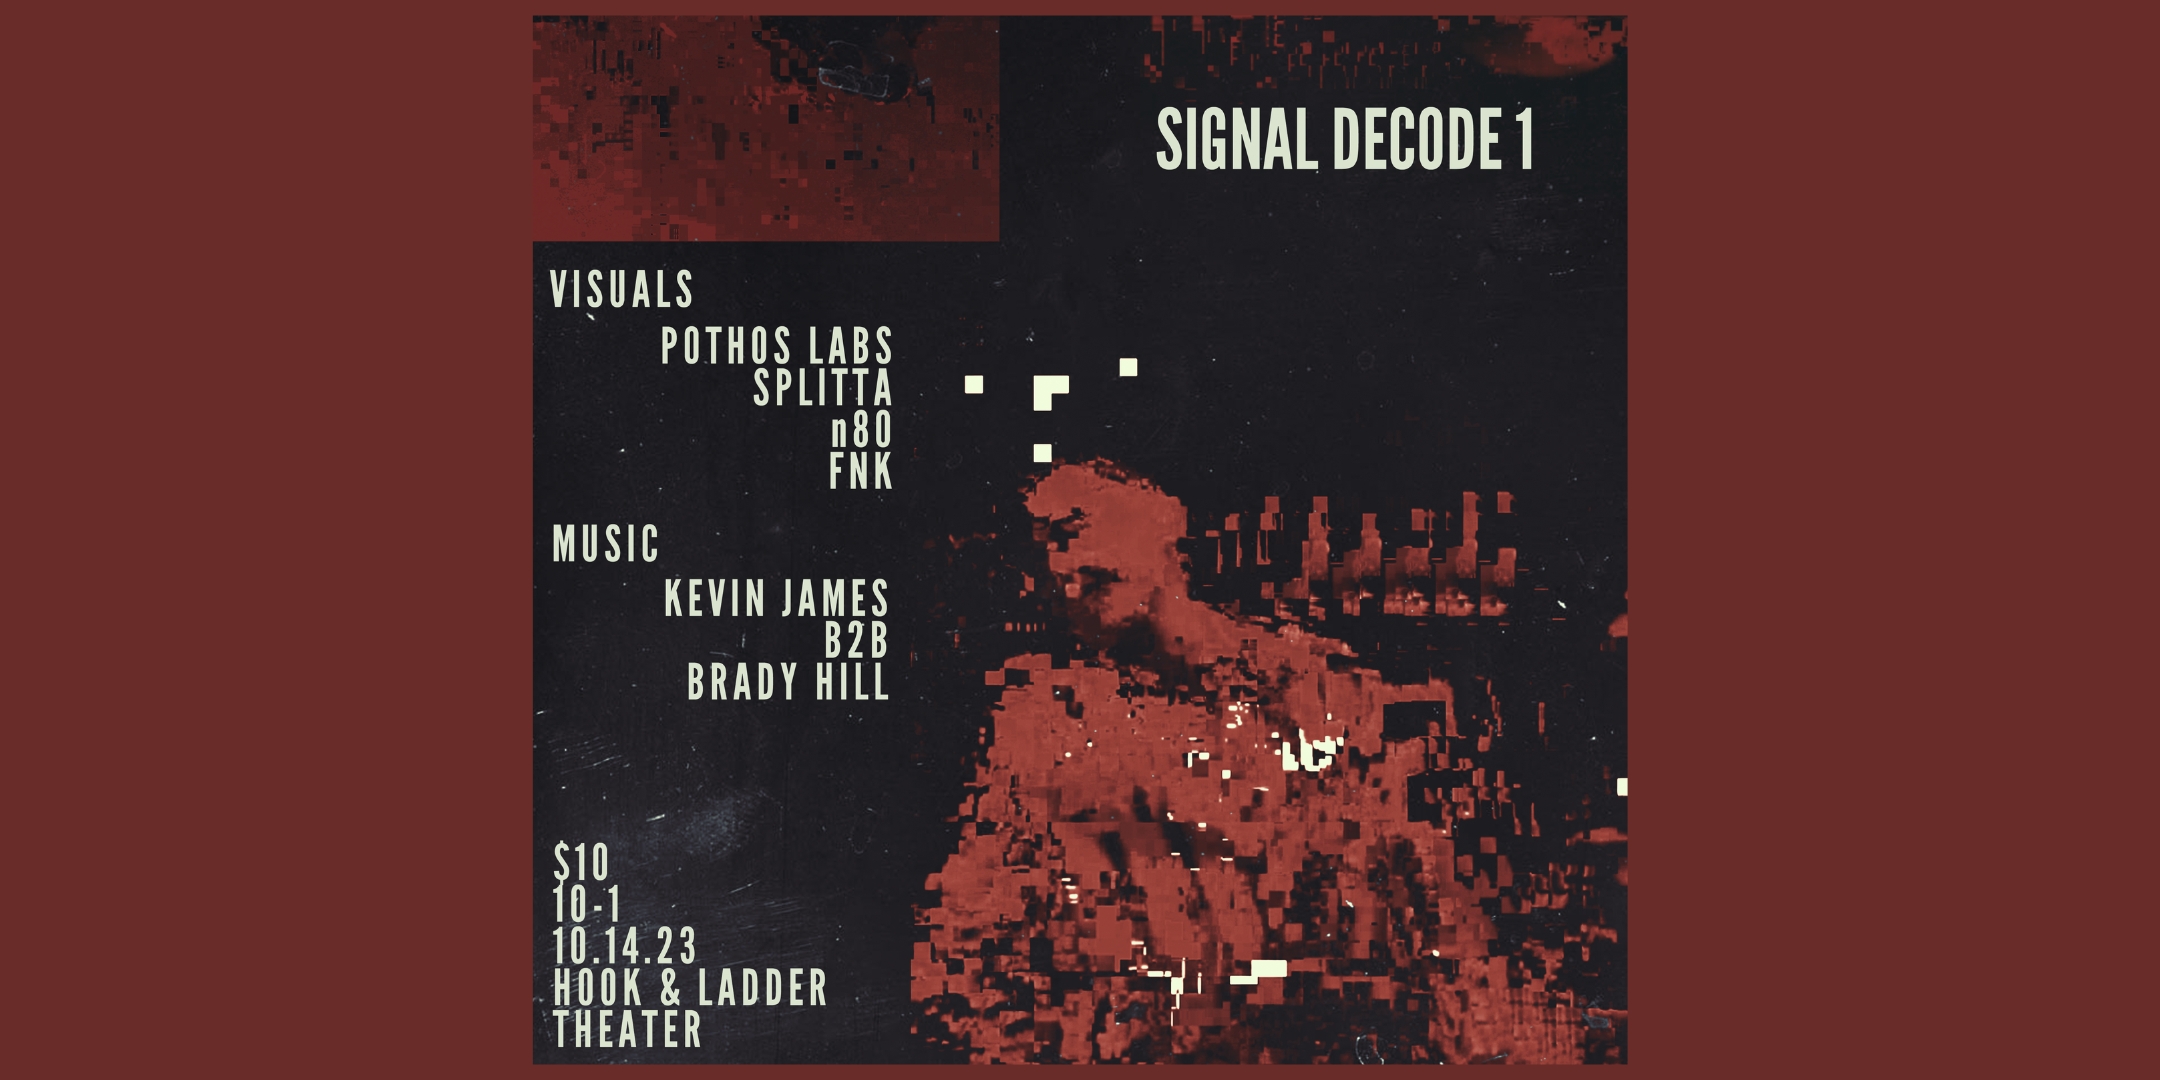 Signal Decode 1 Dance Party Saturday, October 14 The Hook and Ladder Theater Doors 10:00pm :: Music 10:00pm :: 21+ $5 ADV / $10 DOS Tickets On-Sale Now